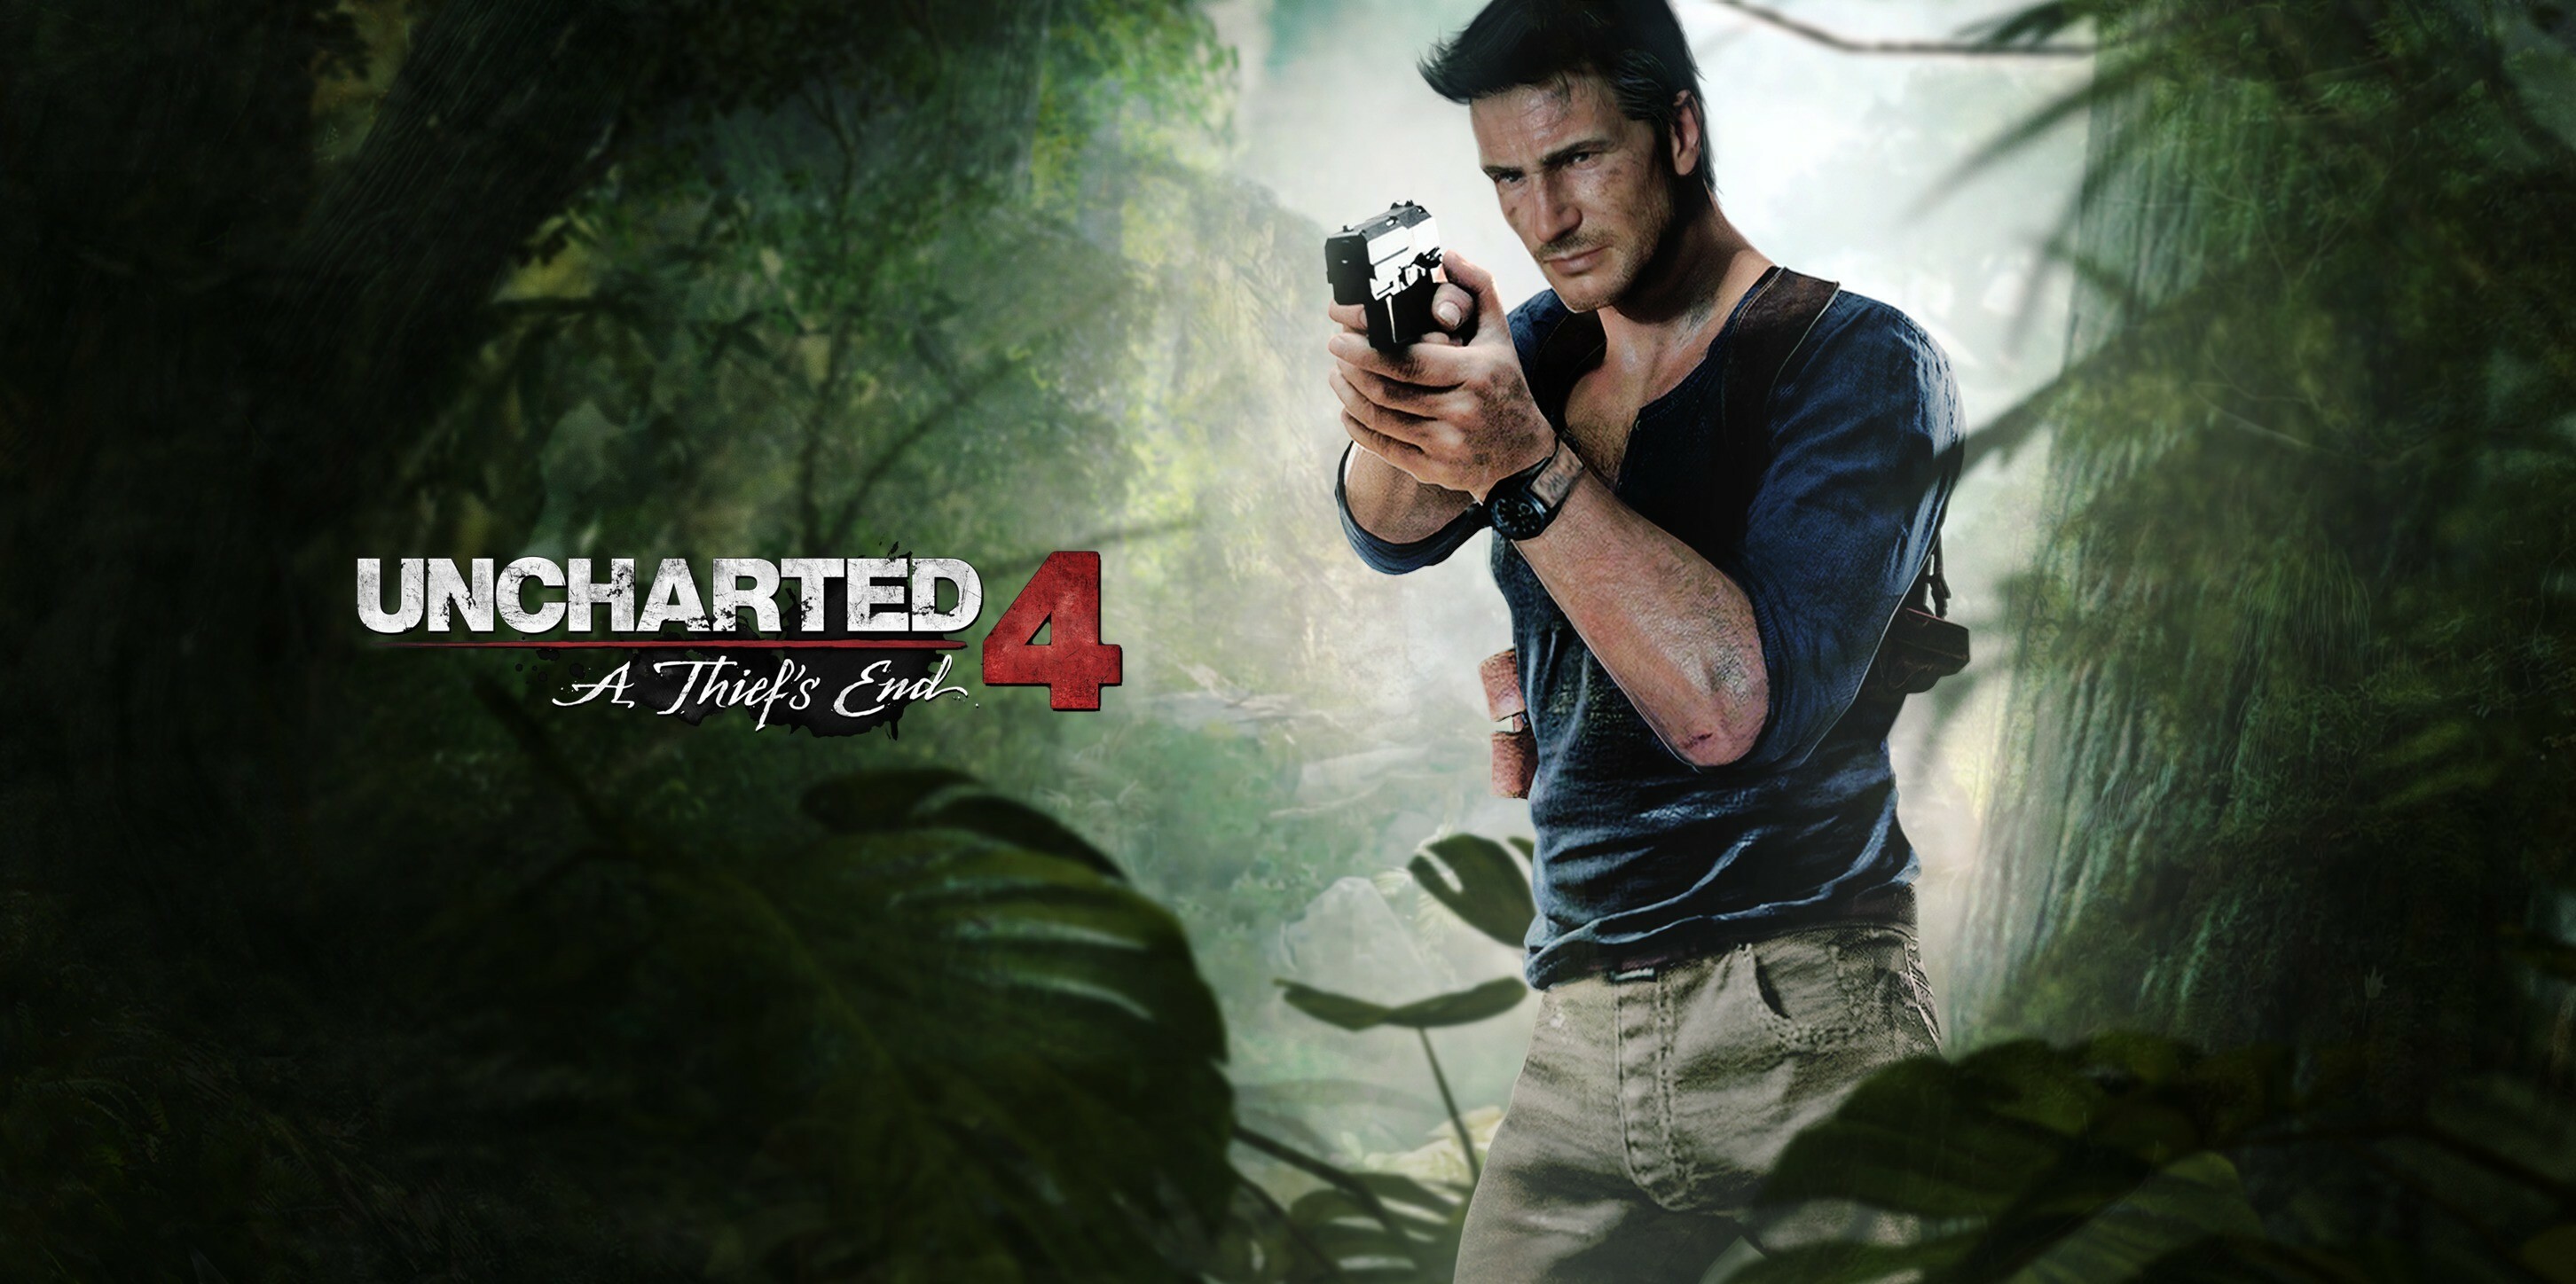 Uncharted: Played from a third-person perspective, and incorporates platformer elements. 2910x1450 Dual Screen Wallpaper.